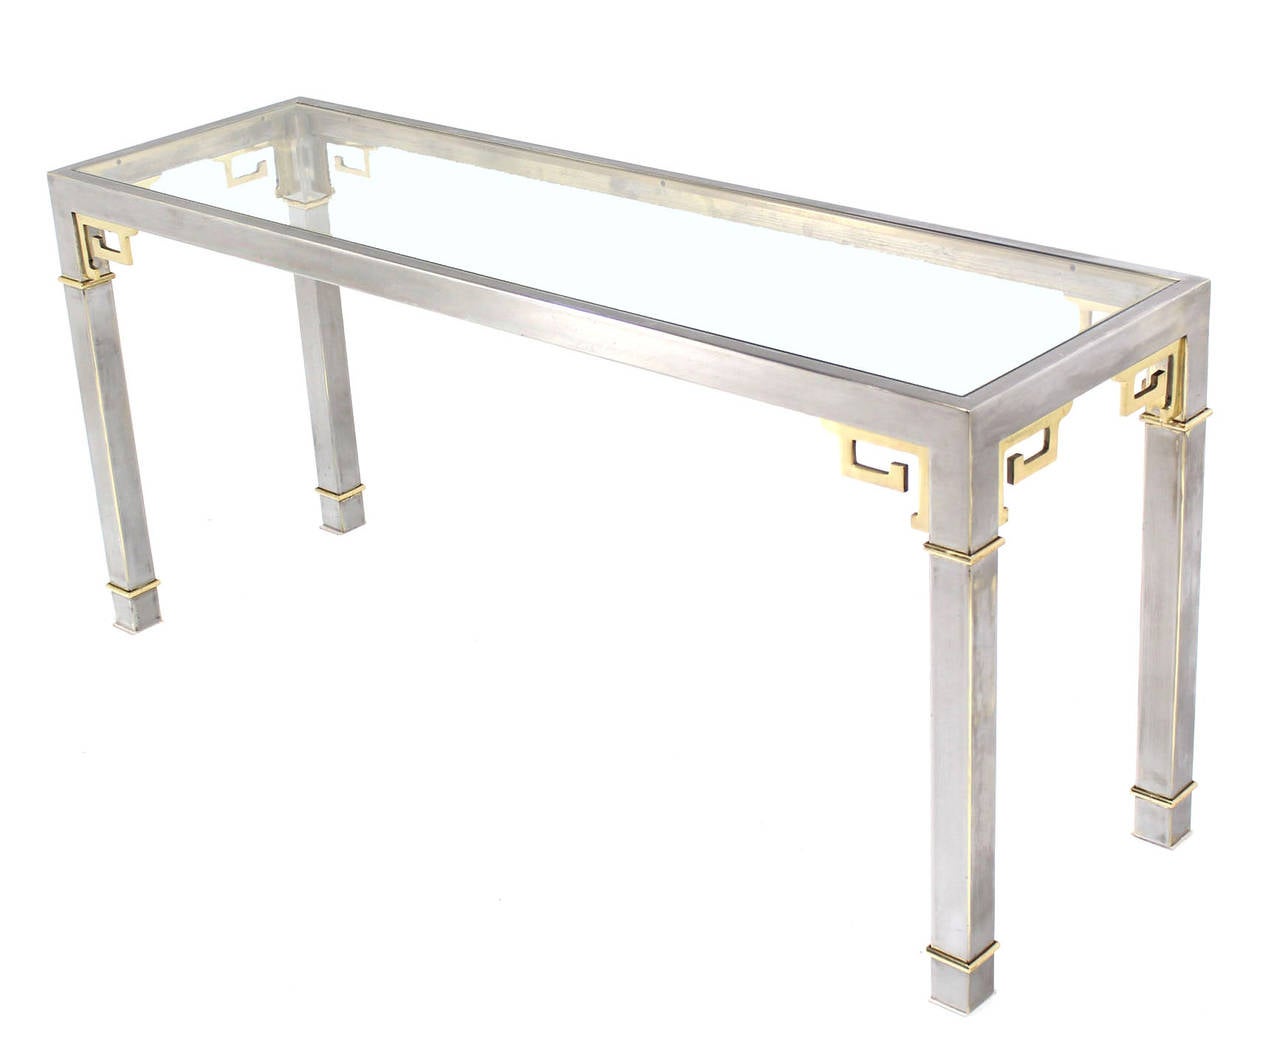 20th Century Chrome Brass and Glass Greek Key Design Console Table by Mastercraft